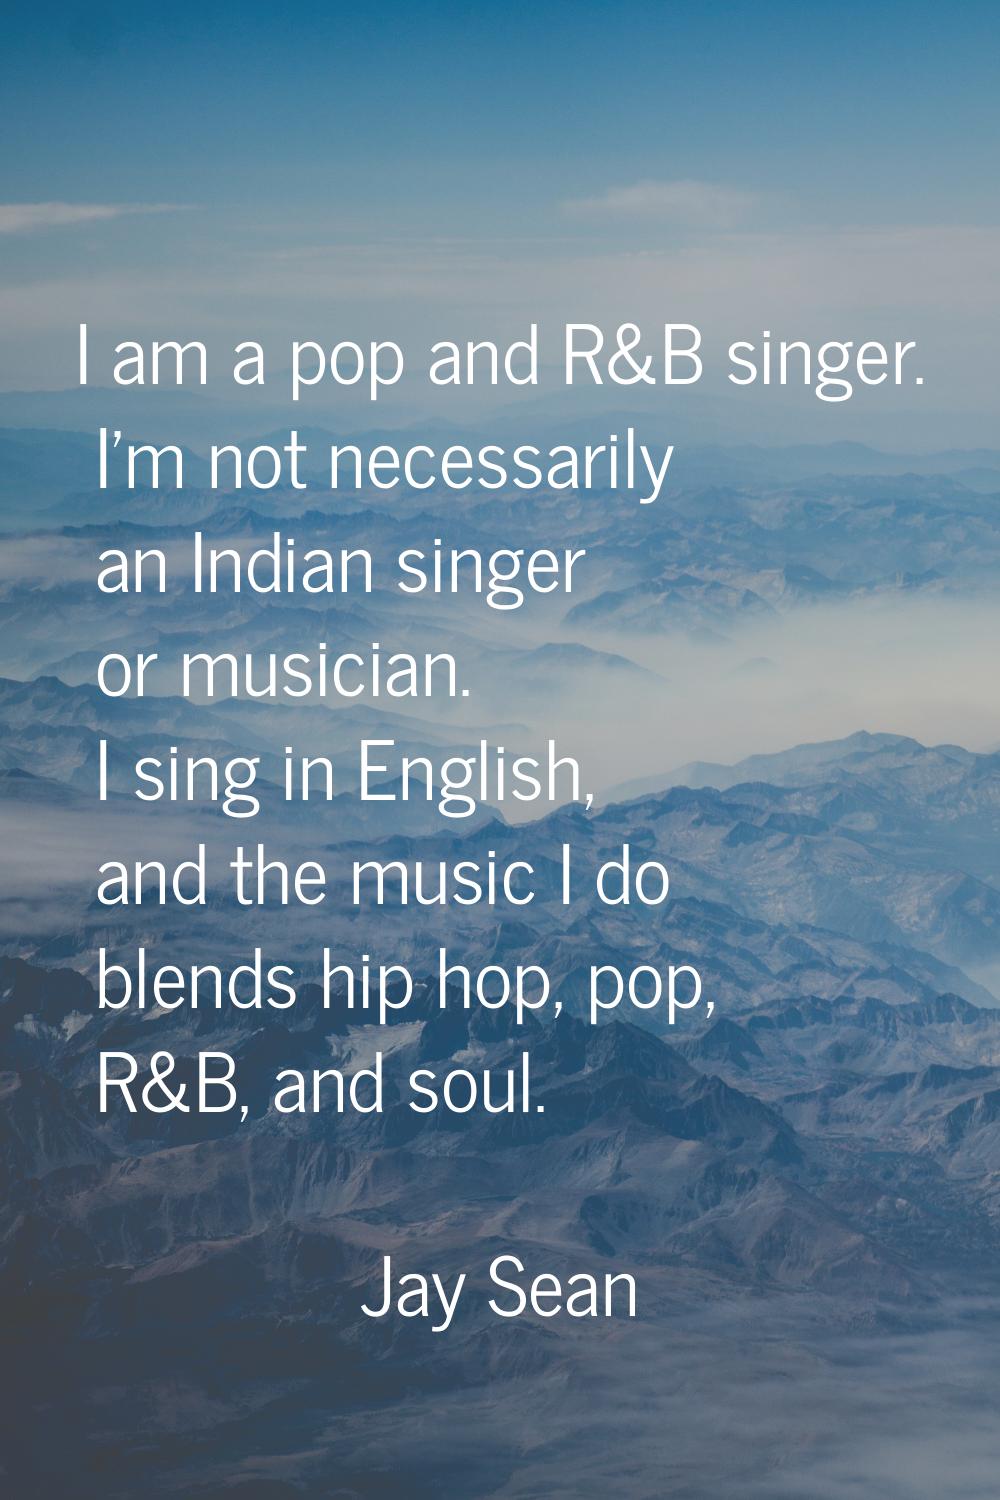 I am a pop and R&B singer. I'm not necessarily an Indian singer or musician. I sing in English, and